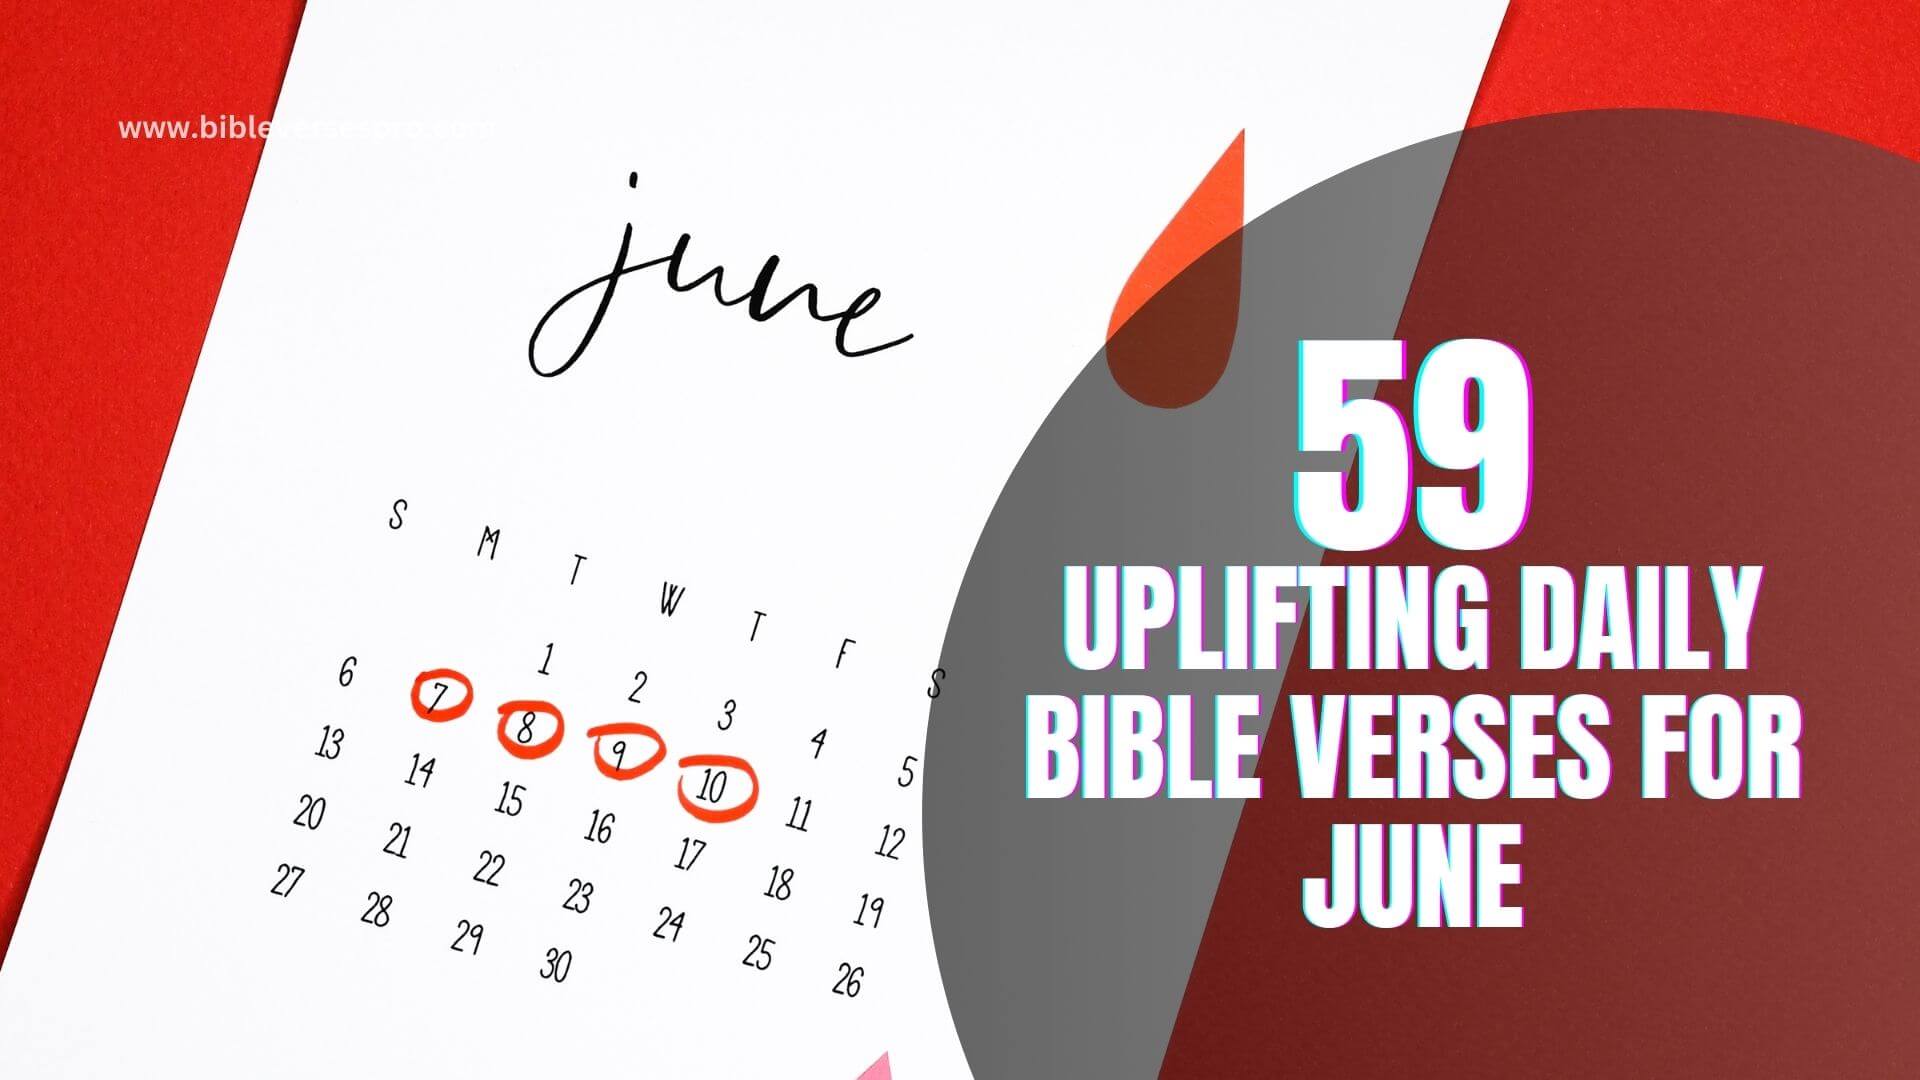 UPLIFTING DAILY BIBLE VERSES FOR JUNE (1)